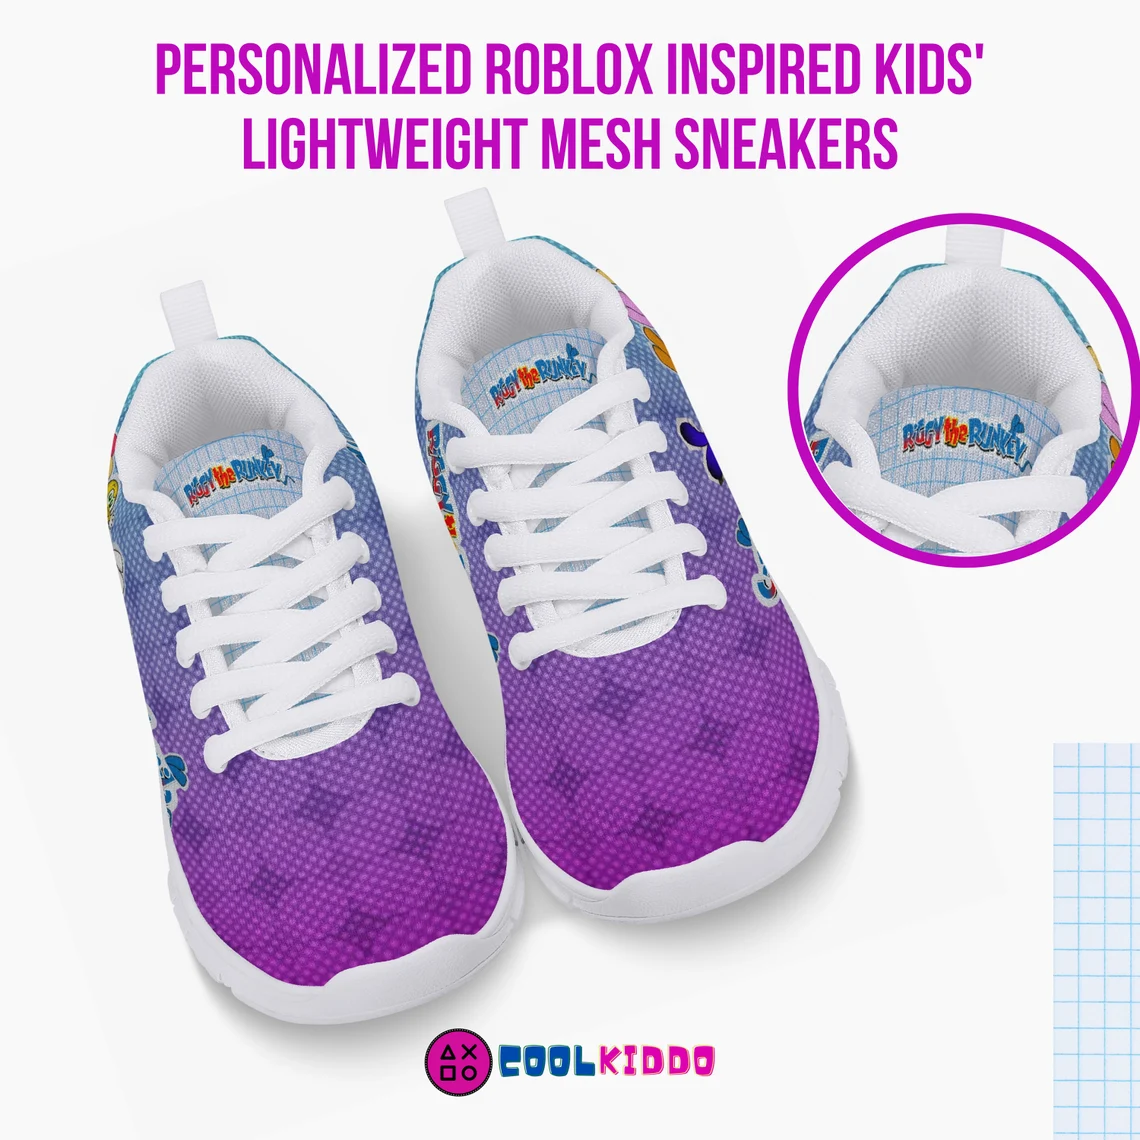 Personalized RiGGY the RUNKEY Lightweight Mesh Sneakers for kids and youth Cool Kiddo 12